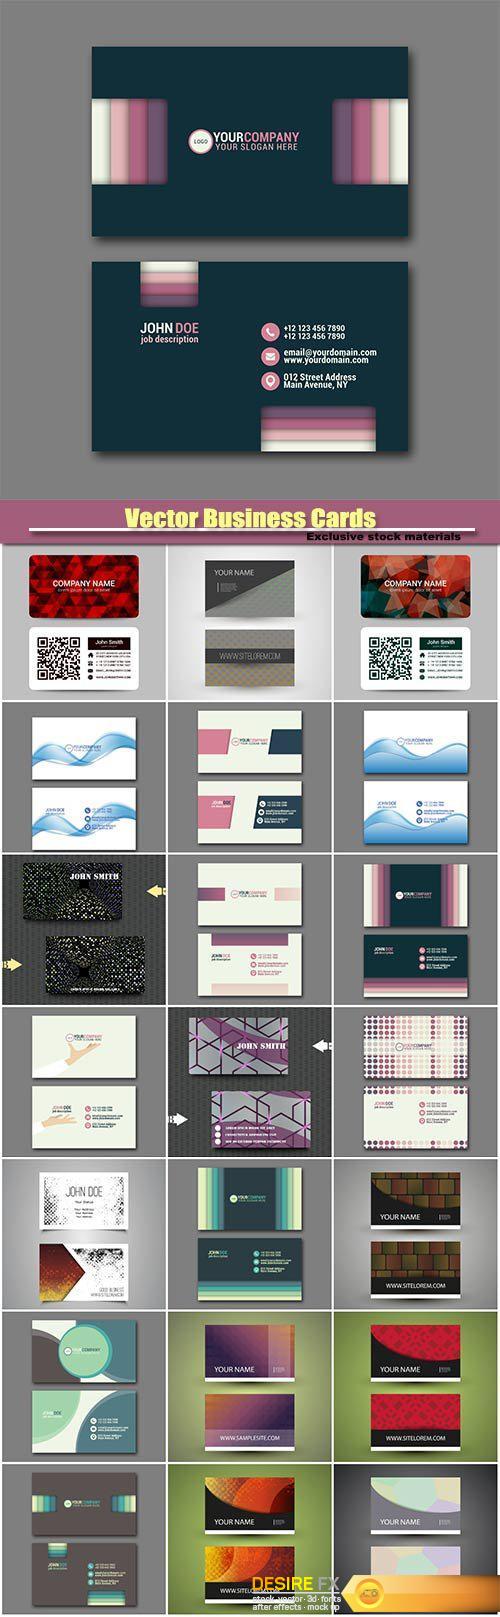 Stylish vector business cards